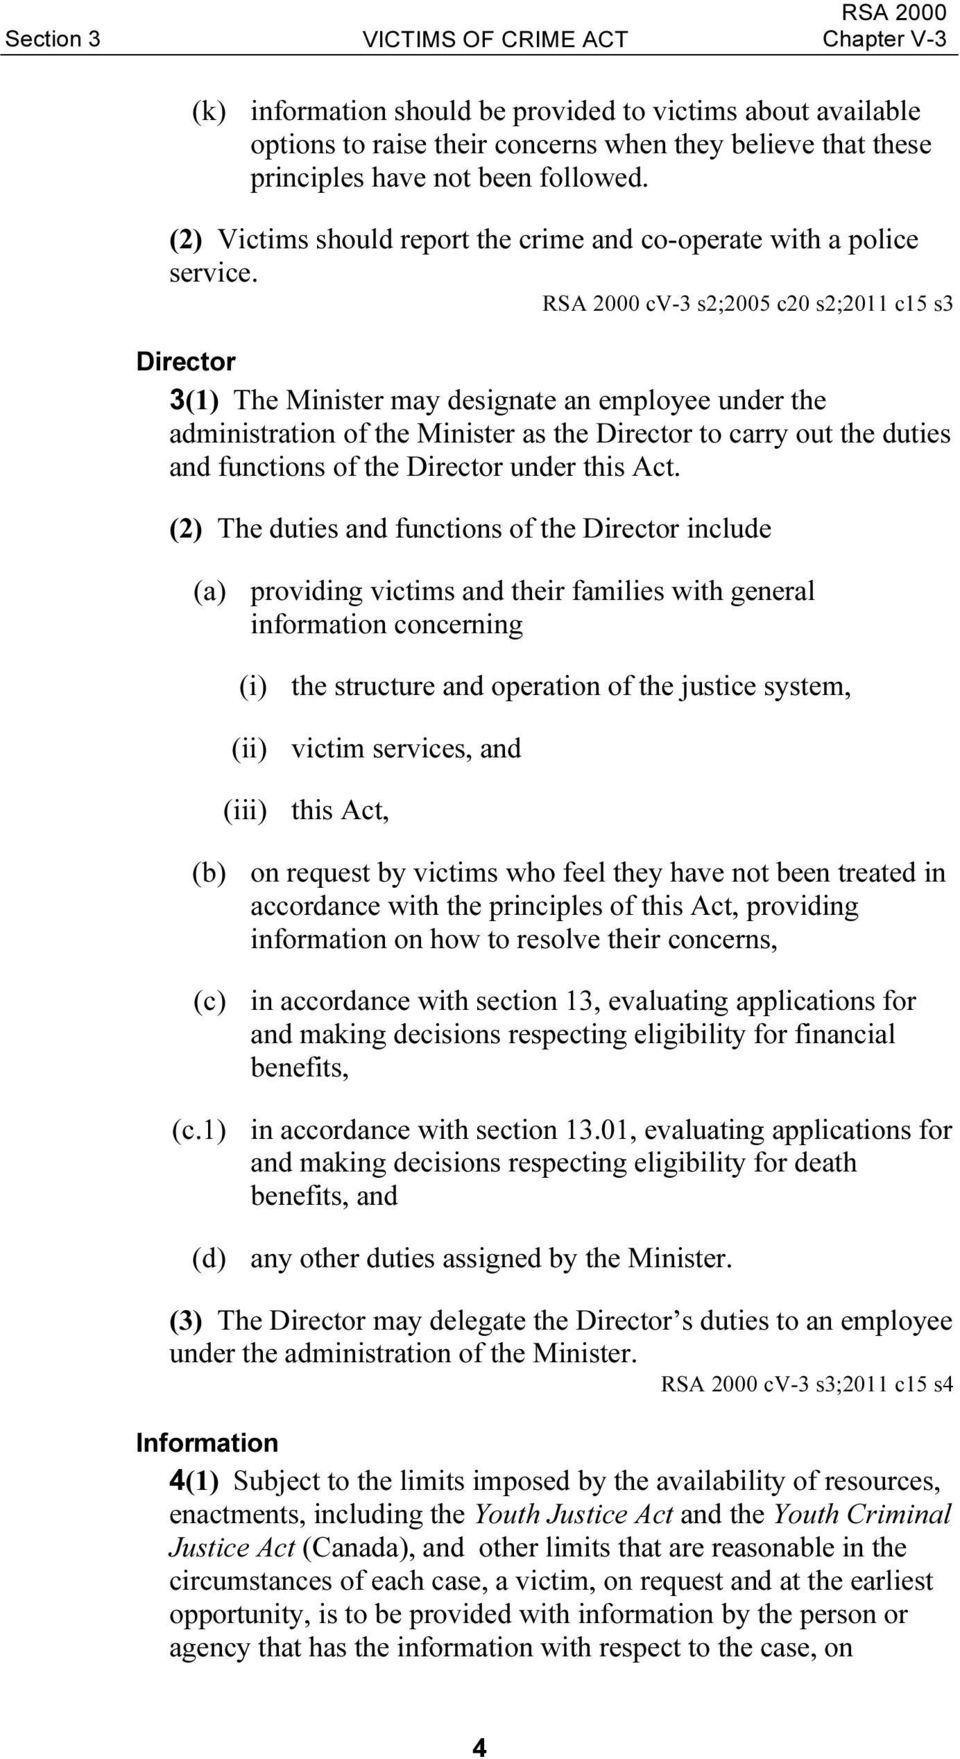 RSA 2000 cv-3 s2;2005 c20 s2;2011 c15 s3 Director 3(1) The Minister may designate an employee under the administration of the Minister as the Director to carry out the duties and functions of the